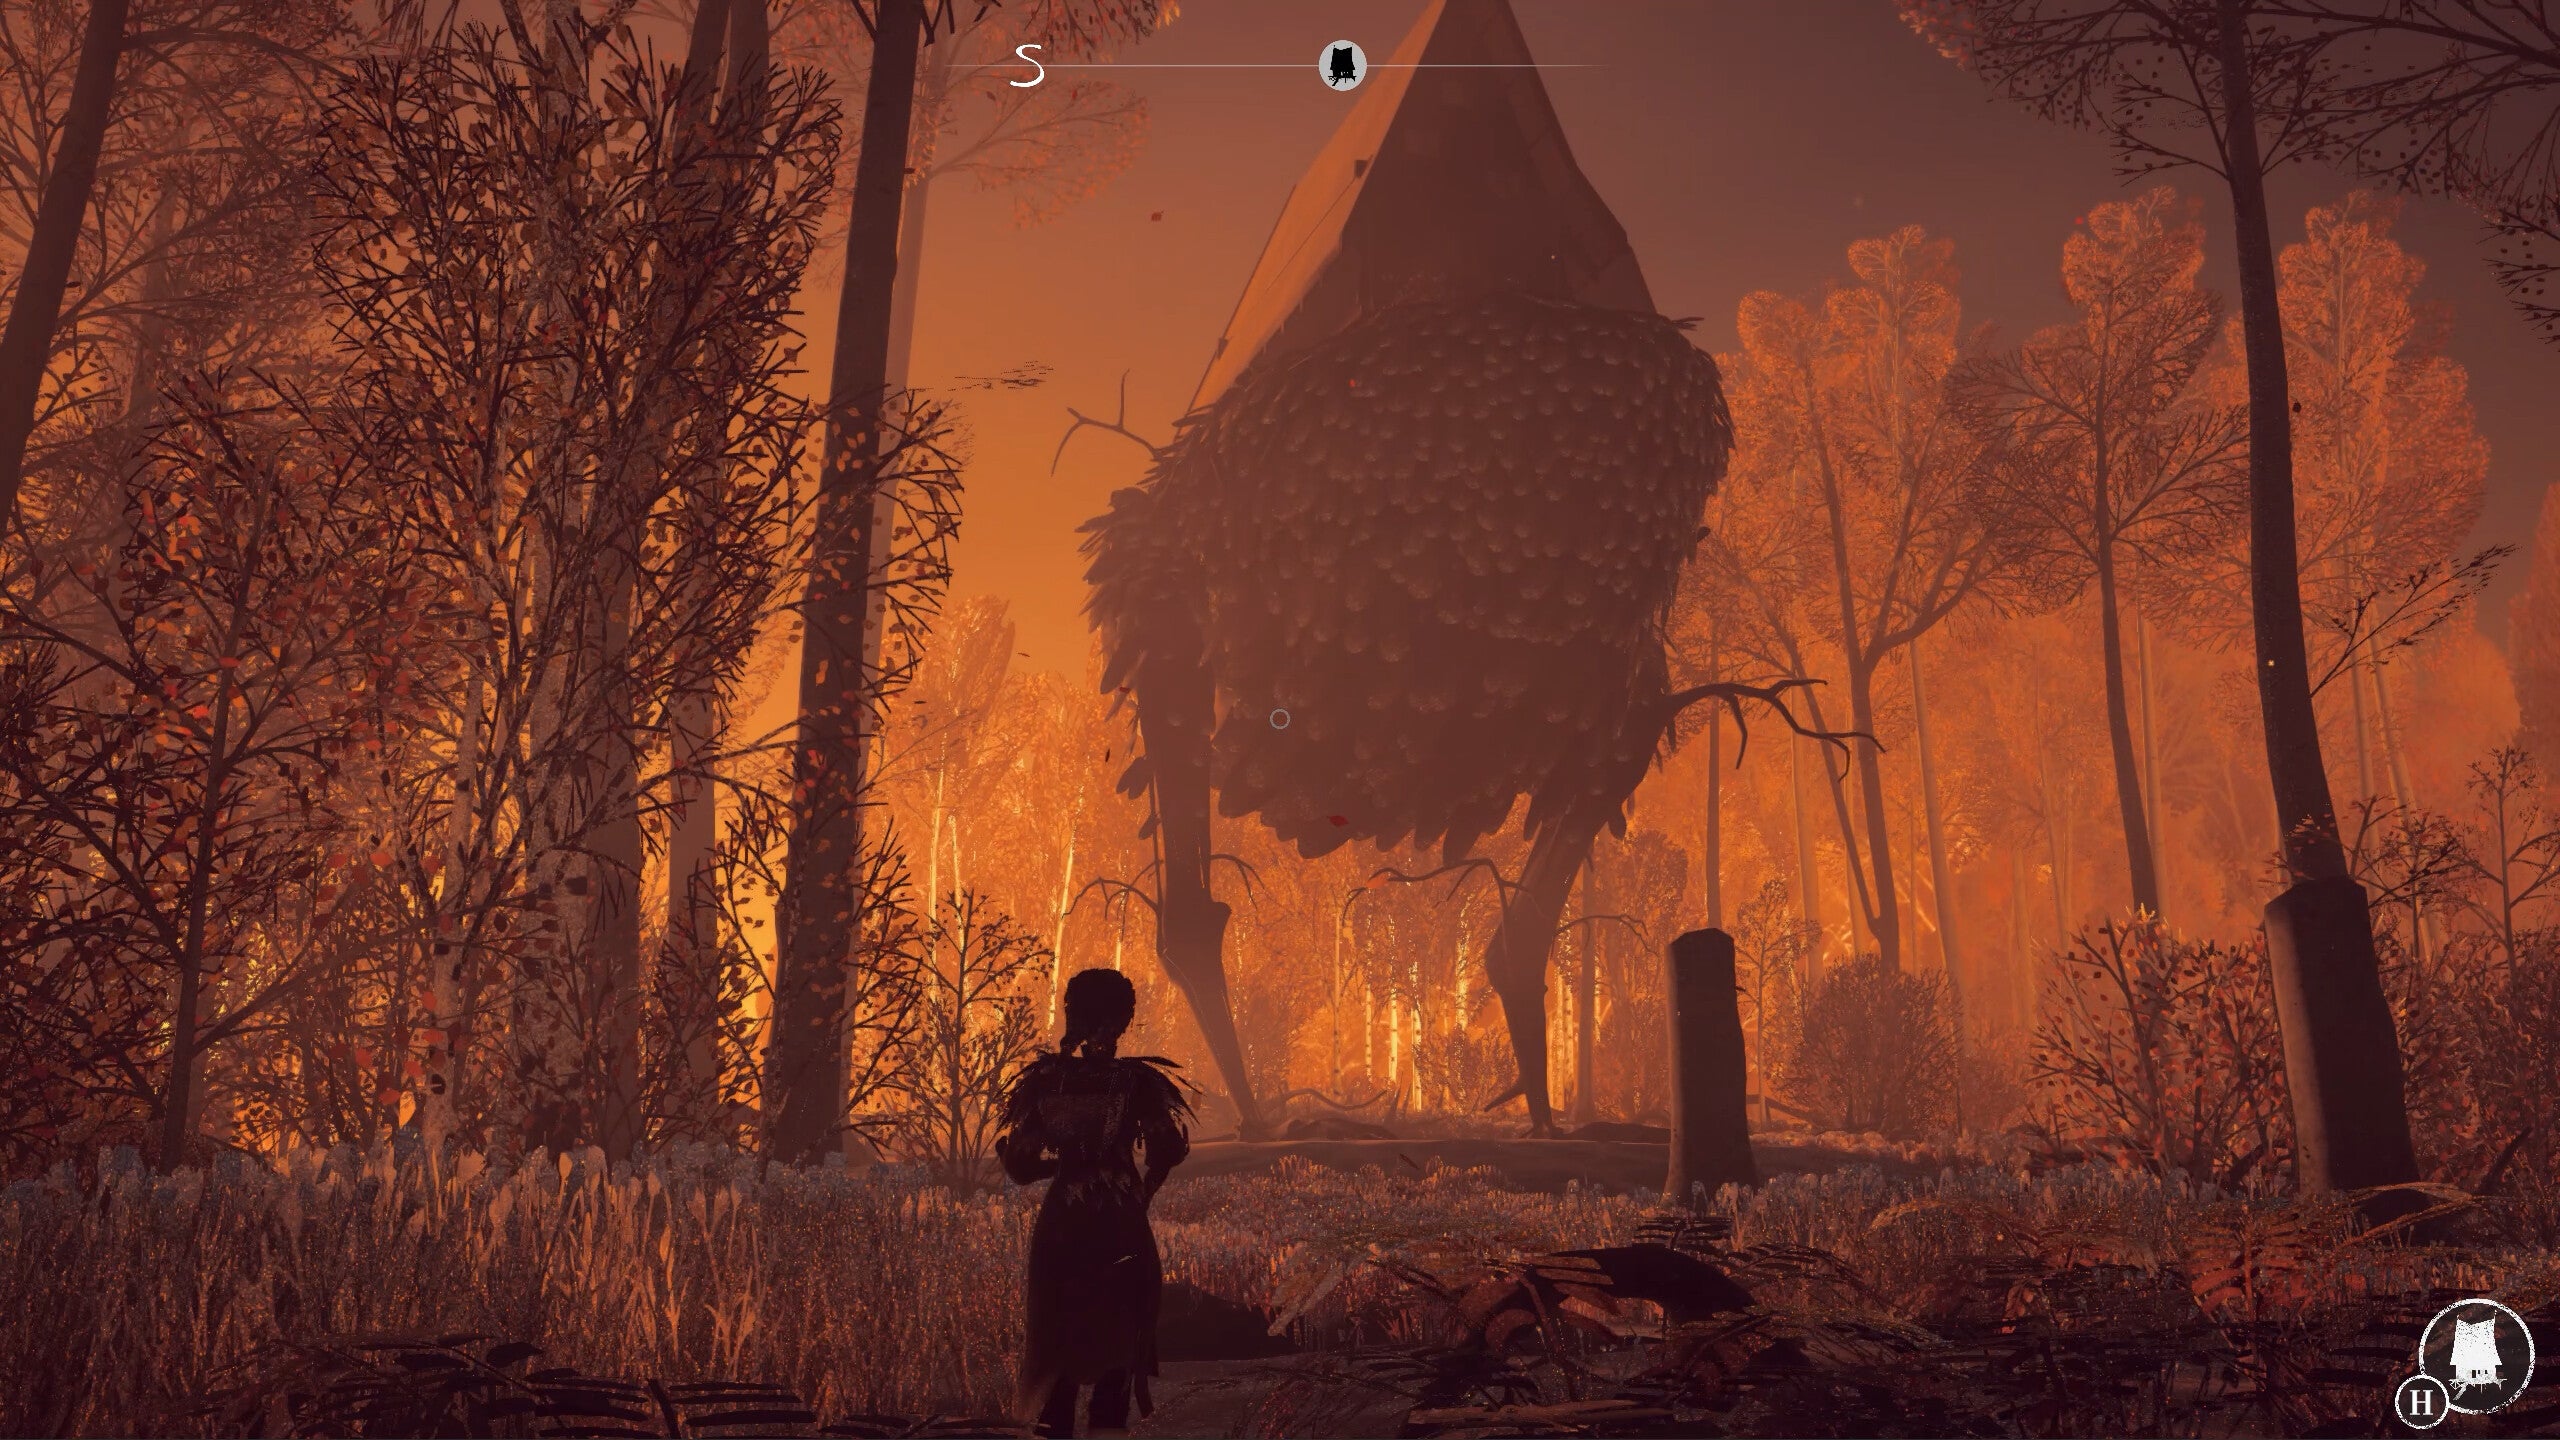 A Reka screenshot showing a baba yaga house bathed in sunset. The house is being lifted up in the air, supported by two giant chicken legs.